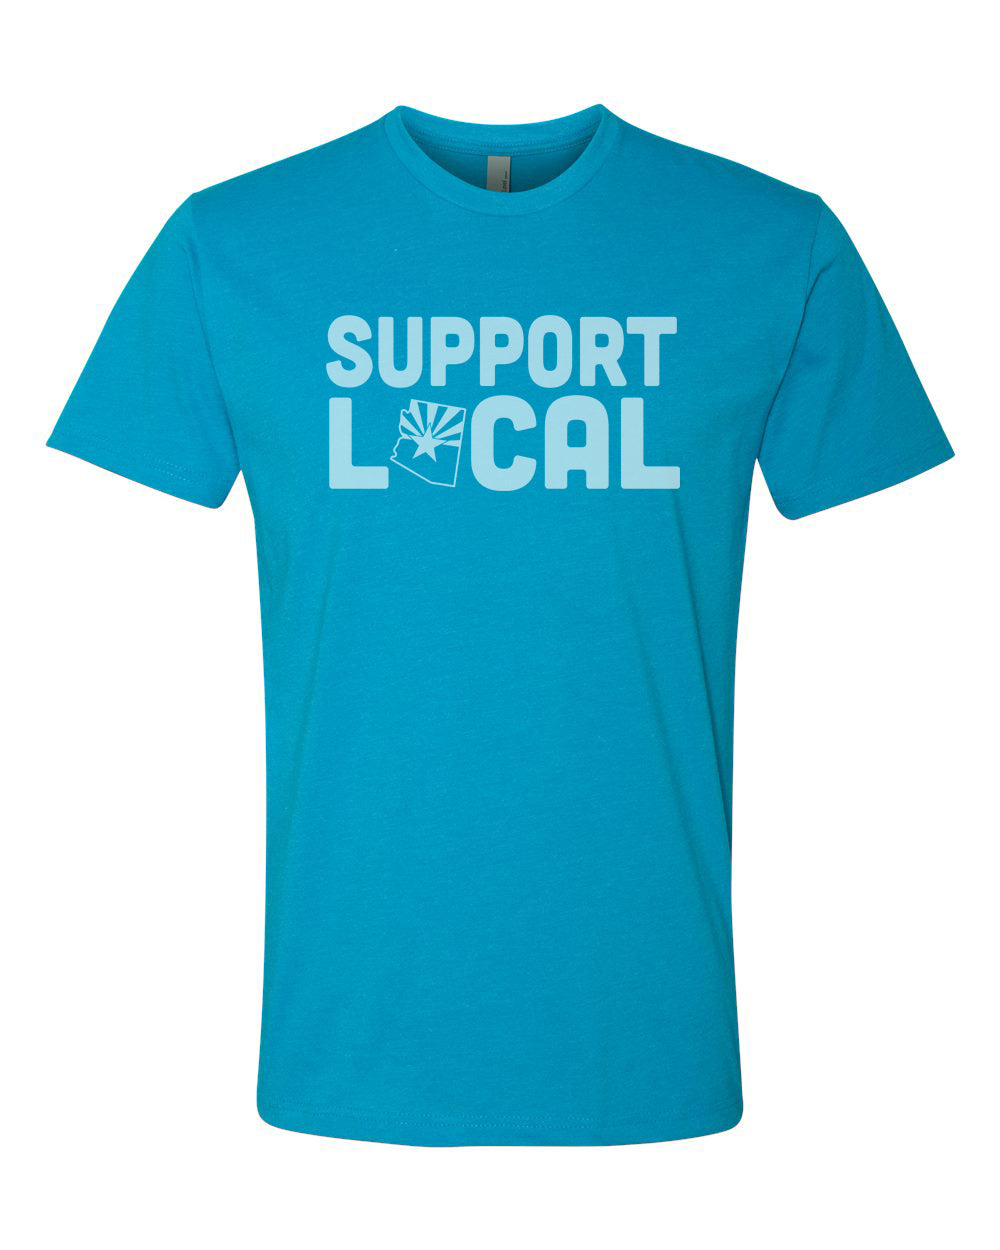 Support Local (AZ PRIDE TURQUOISE)